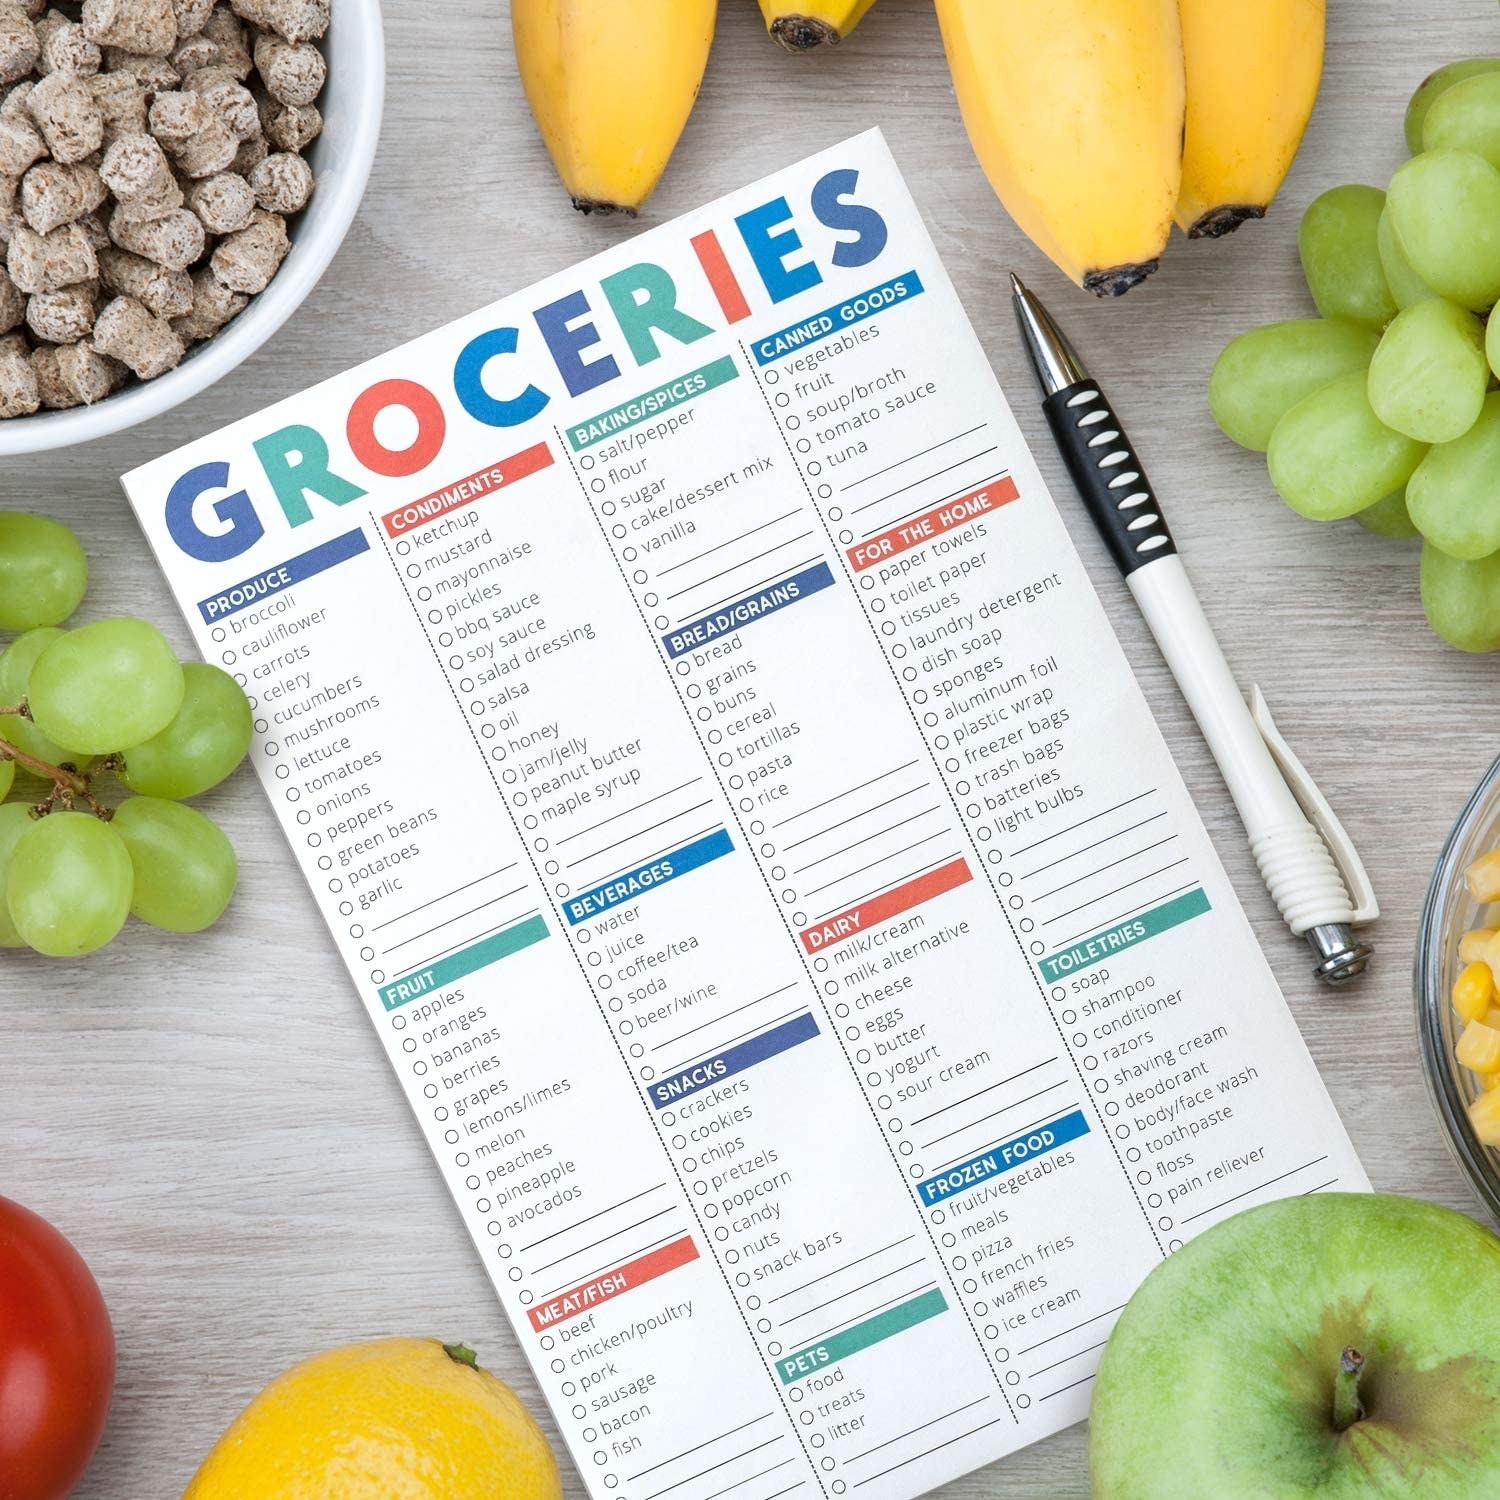 A notepad with a grocery checklist on it